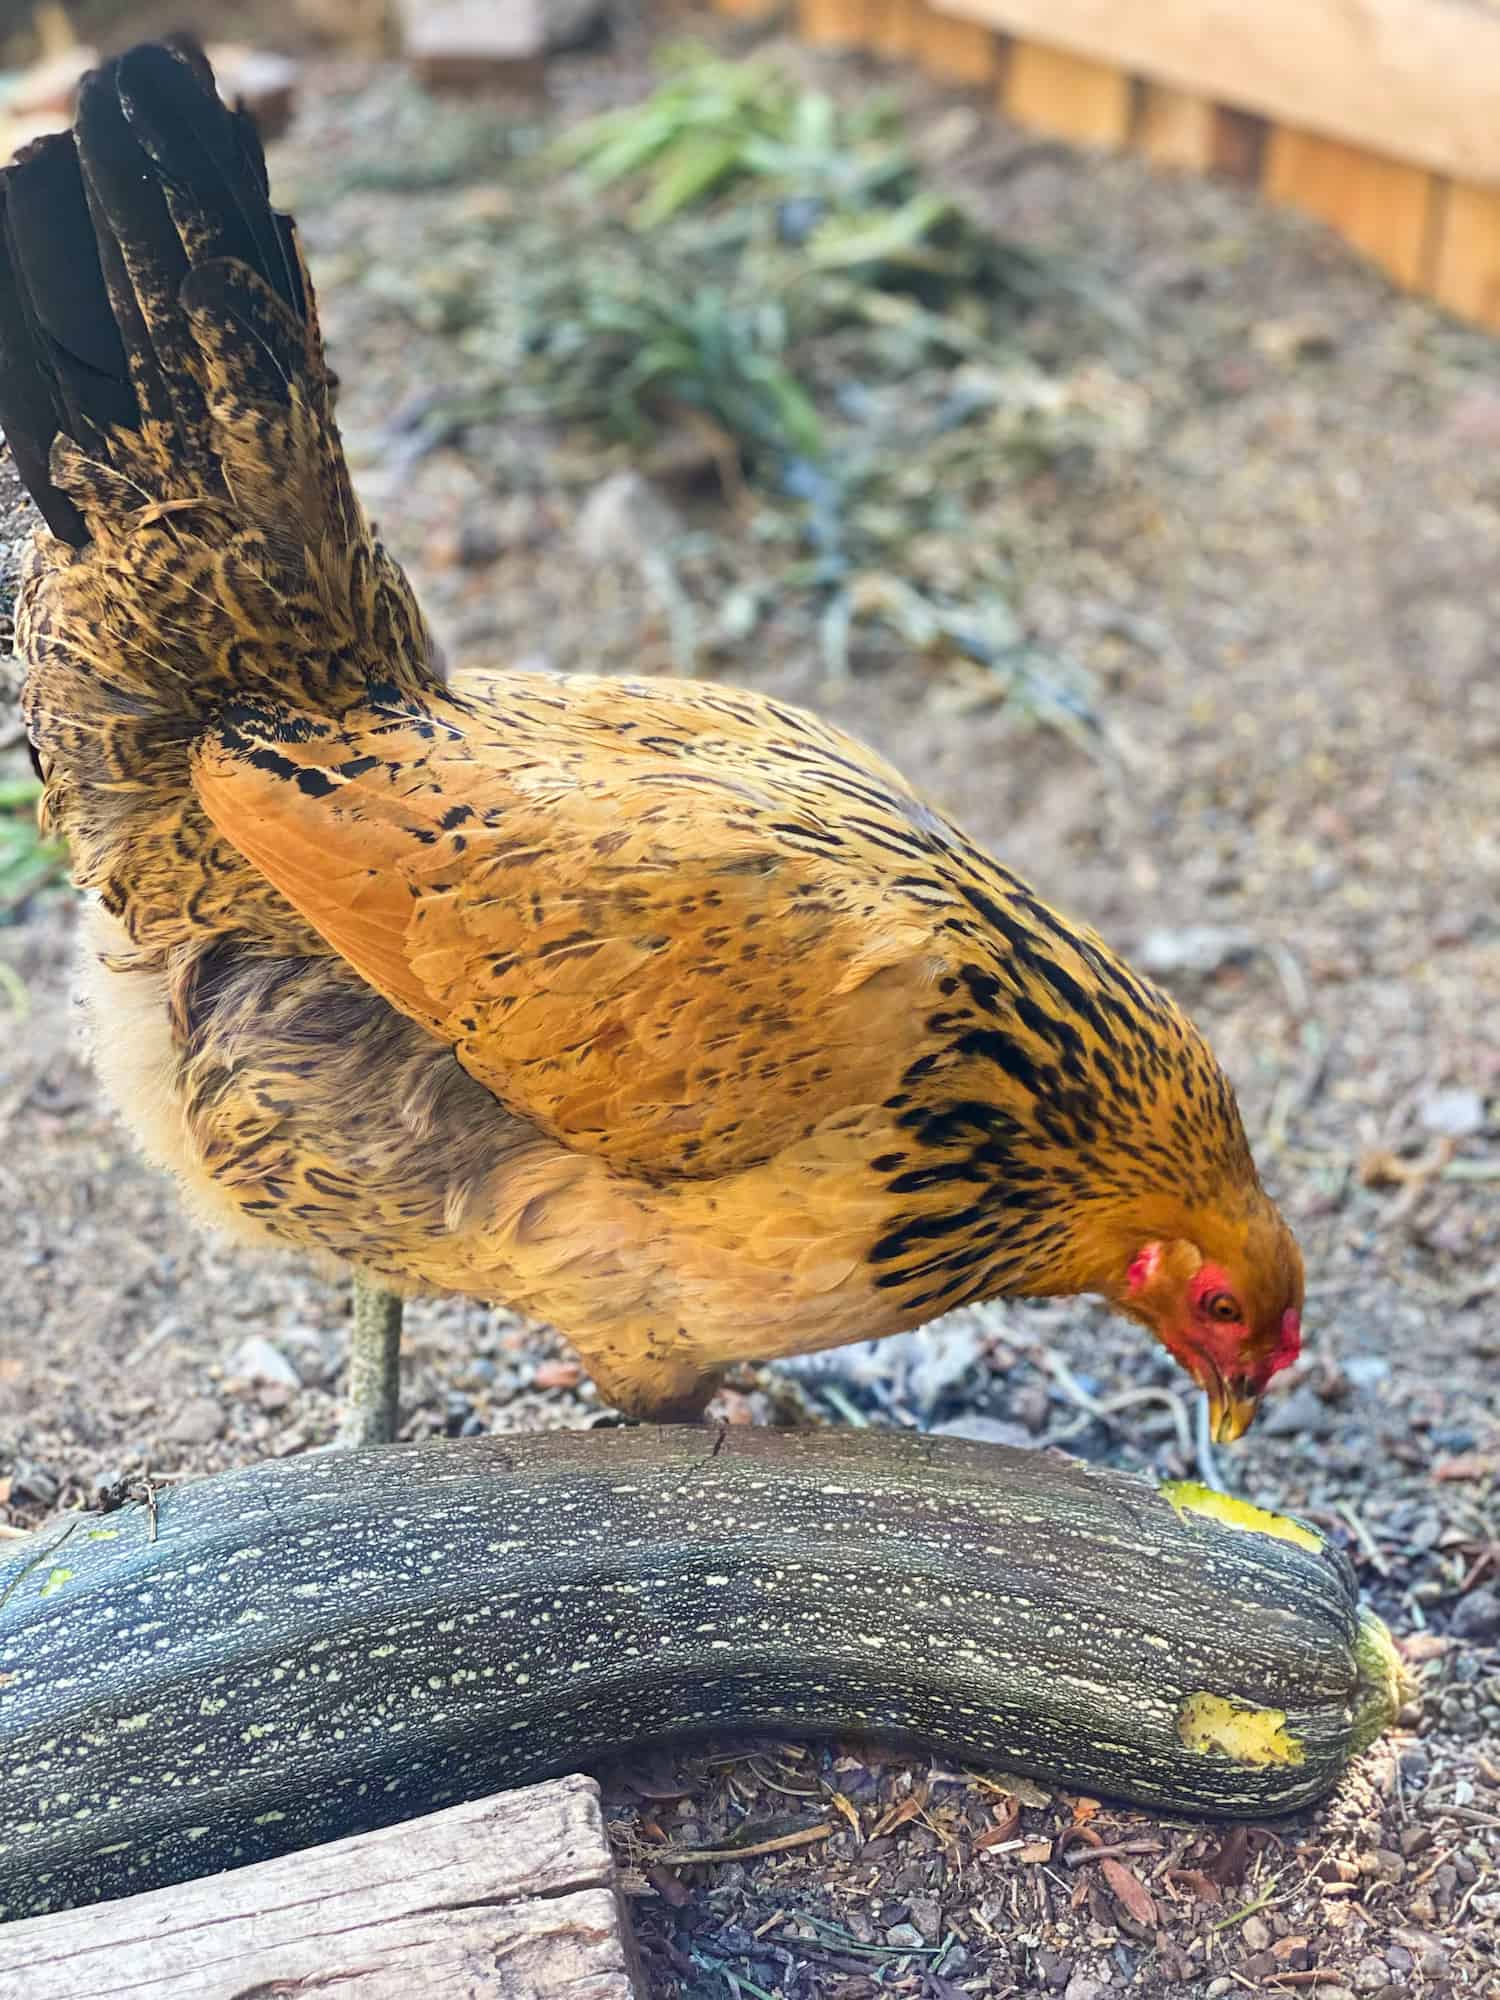 Can Chickens Eat Zucchini? The short answer